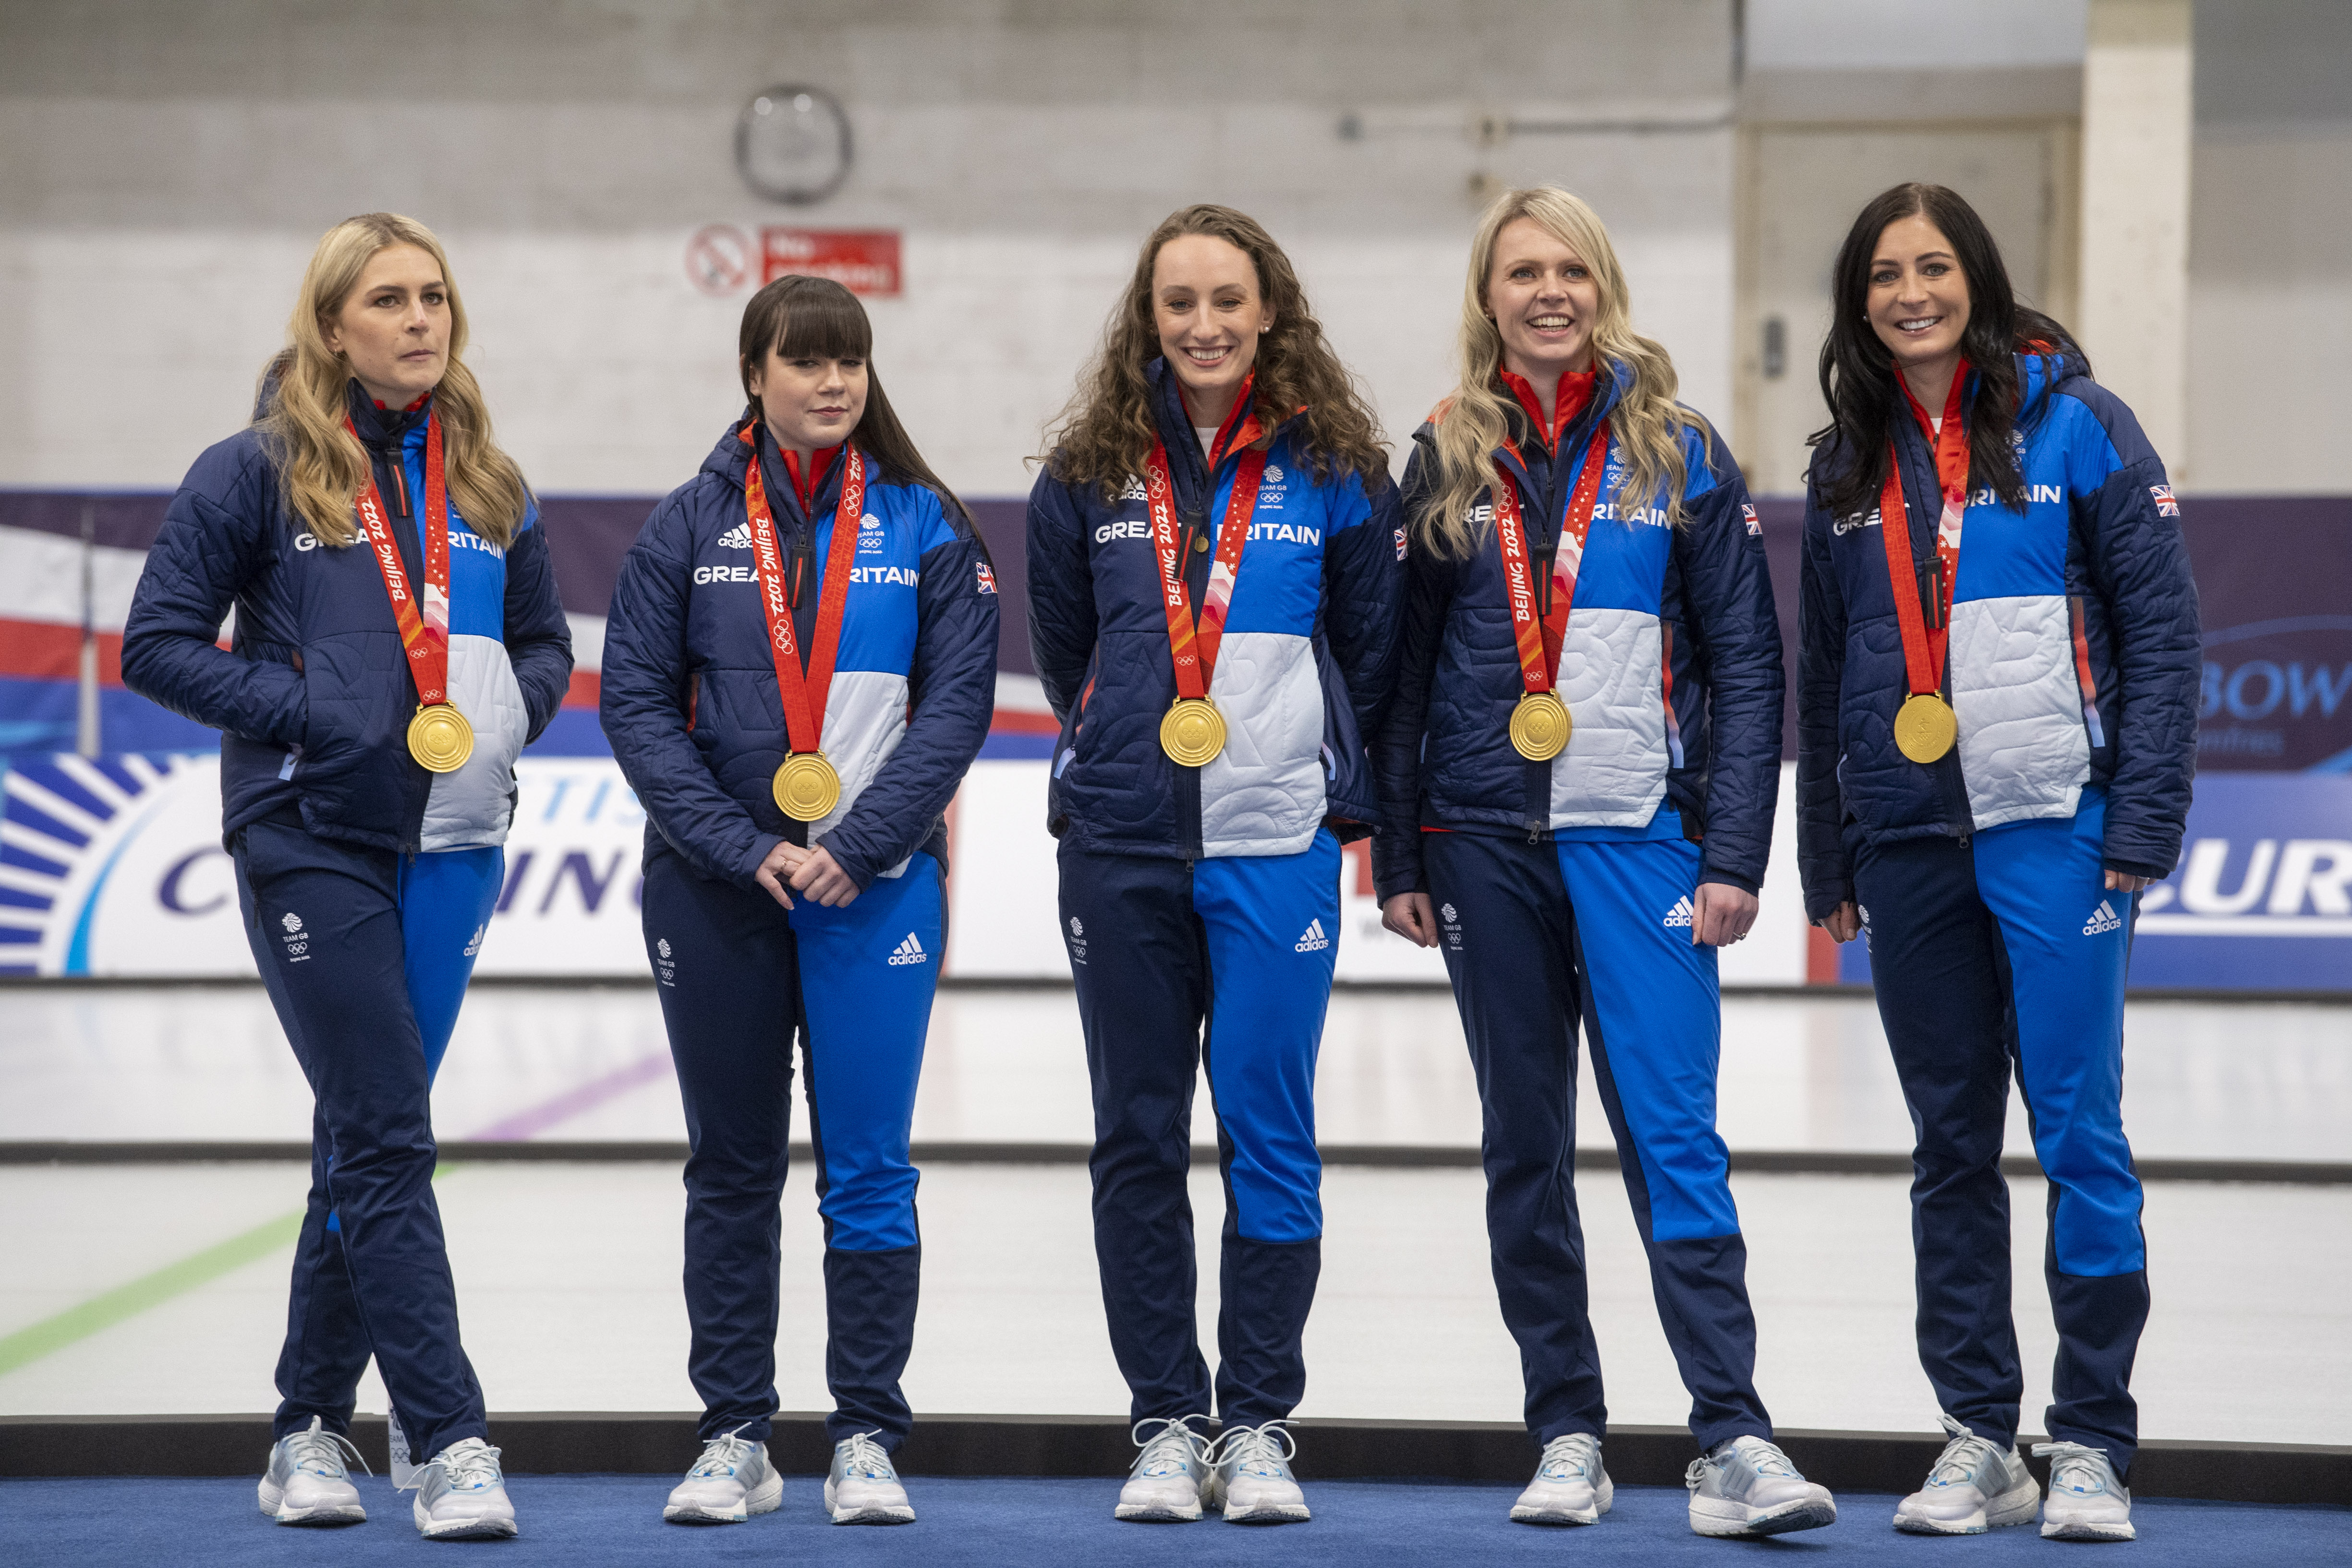 Olympic curling stars Mili Smith, Hailey Duff, Jen Dodds, Vicky Wright are MBE recipients, while Eve Muirhead is made an OBE. (Image: SNS Group)